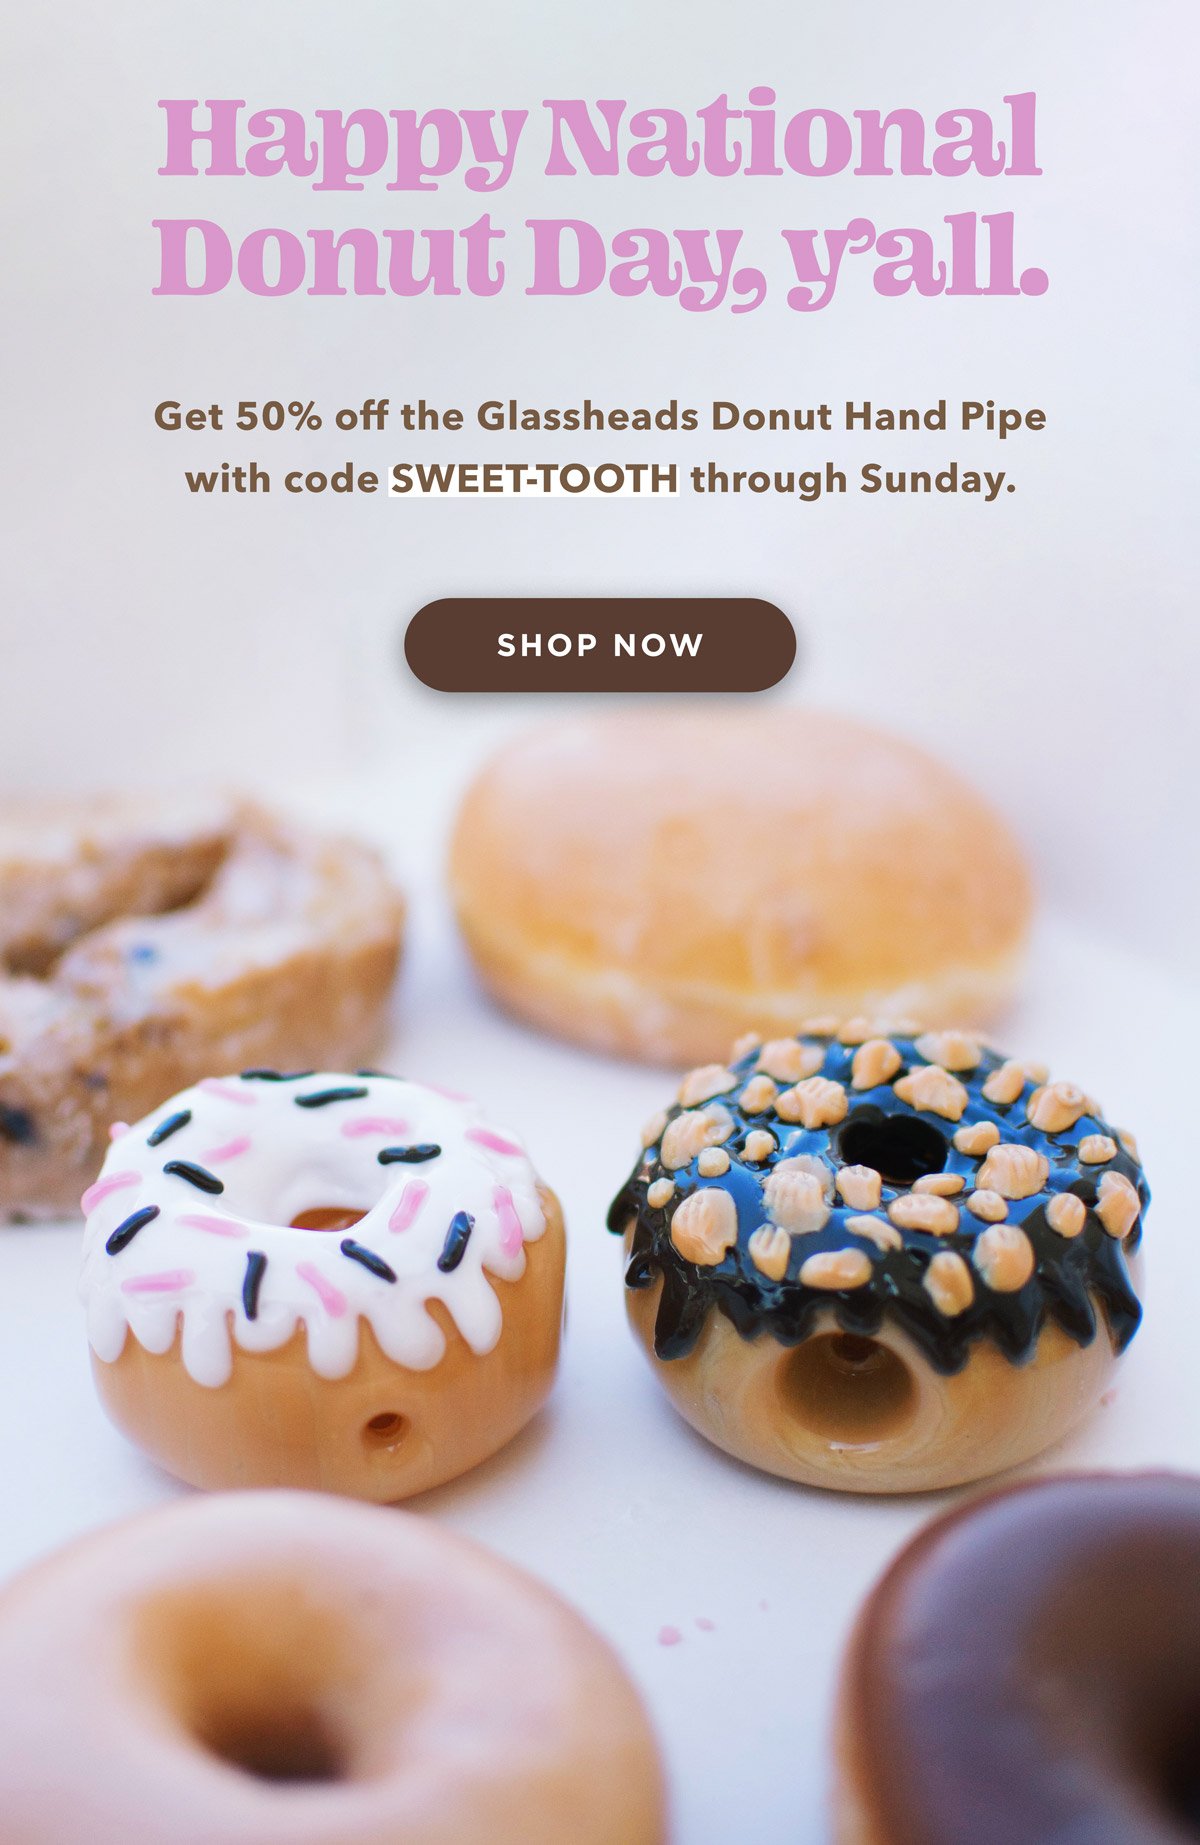 Use code SWEET-TOOTH for 50% off the Glassheads Donut Hand Pipe